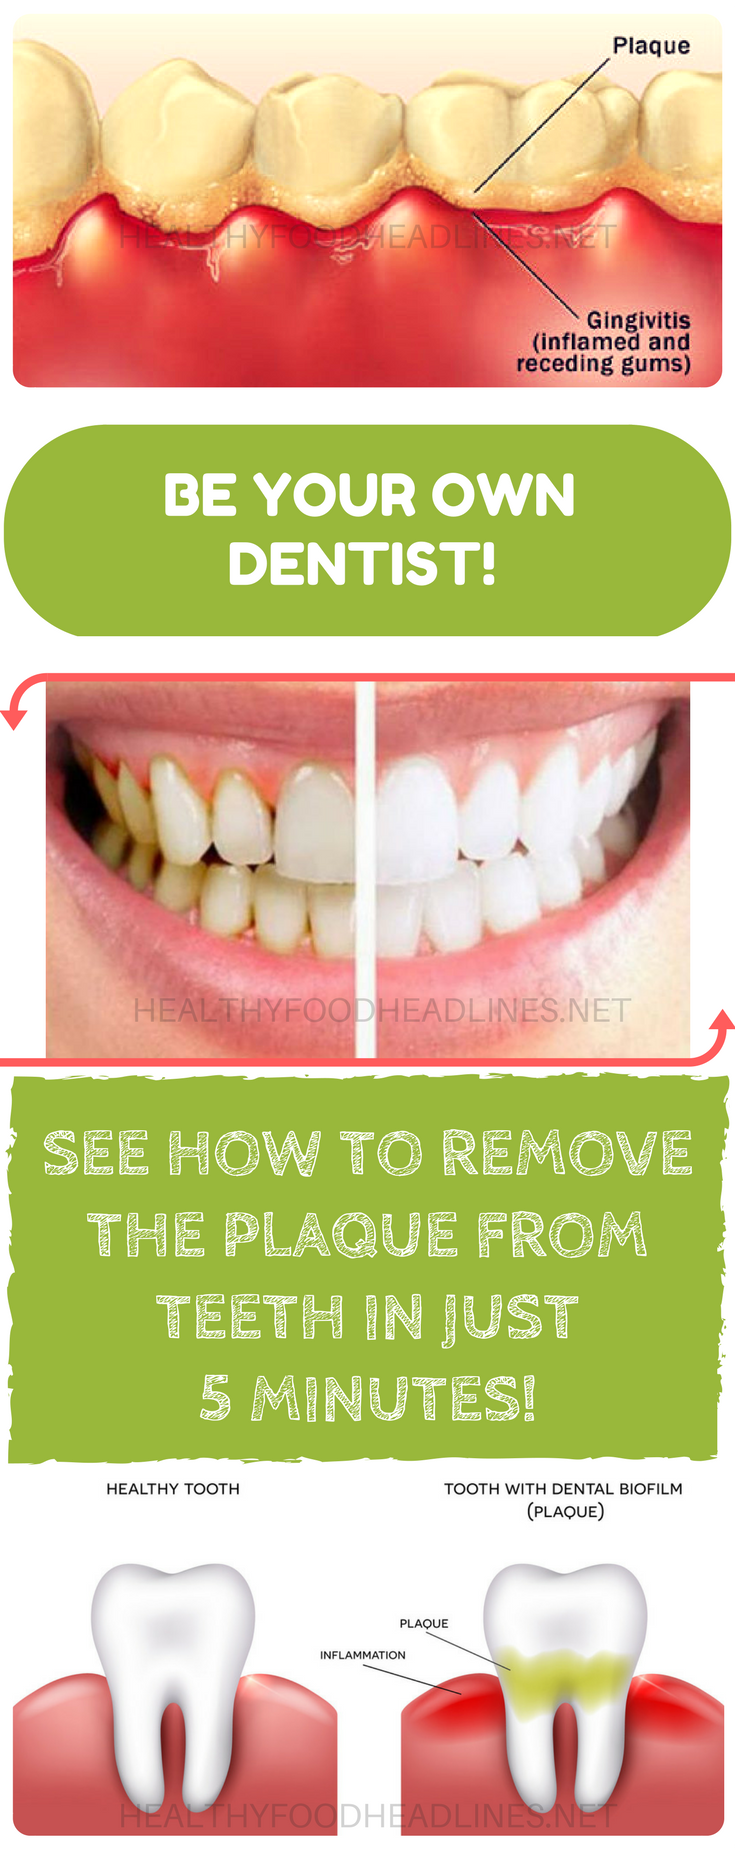 BE-YOUR-OWN-DENTIST-SEE-HOW-TO-REMOVE-THE-PLAQUE-FROM-TEETH-IN-JUST-5-MINUTES (1)